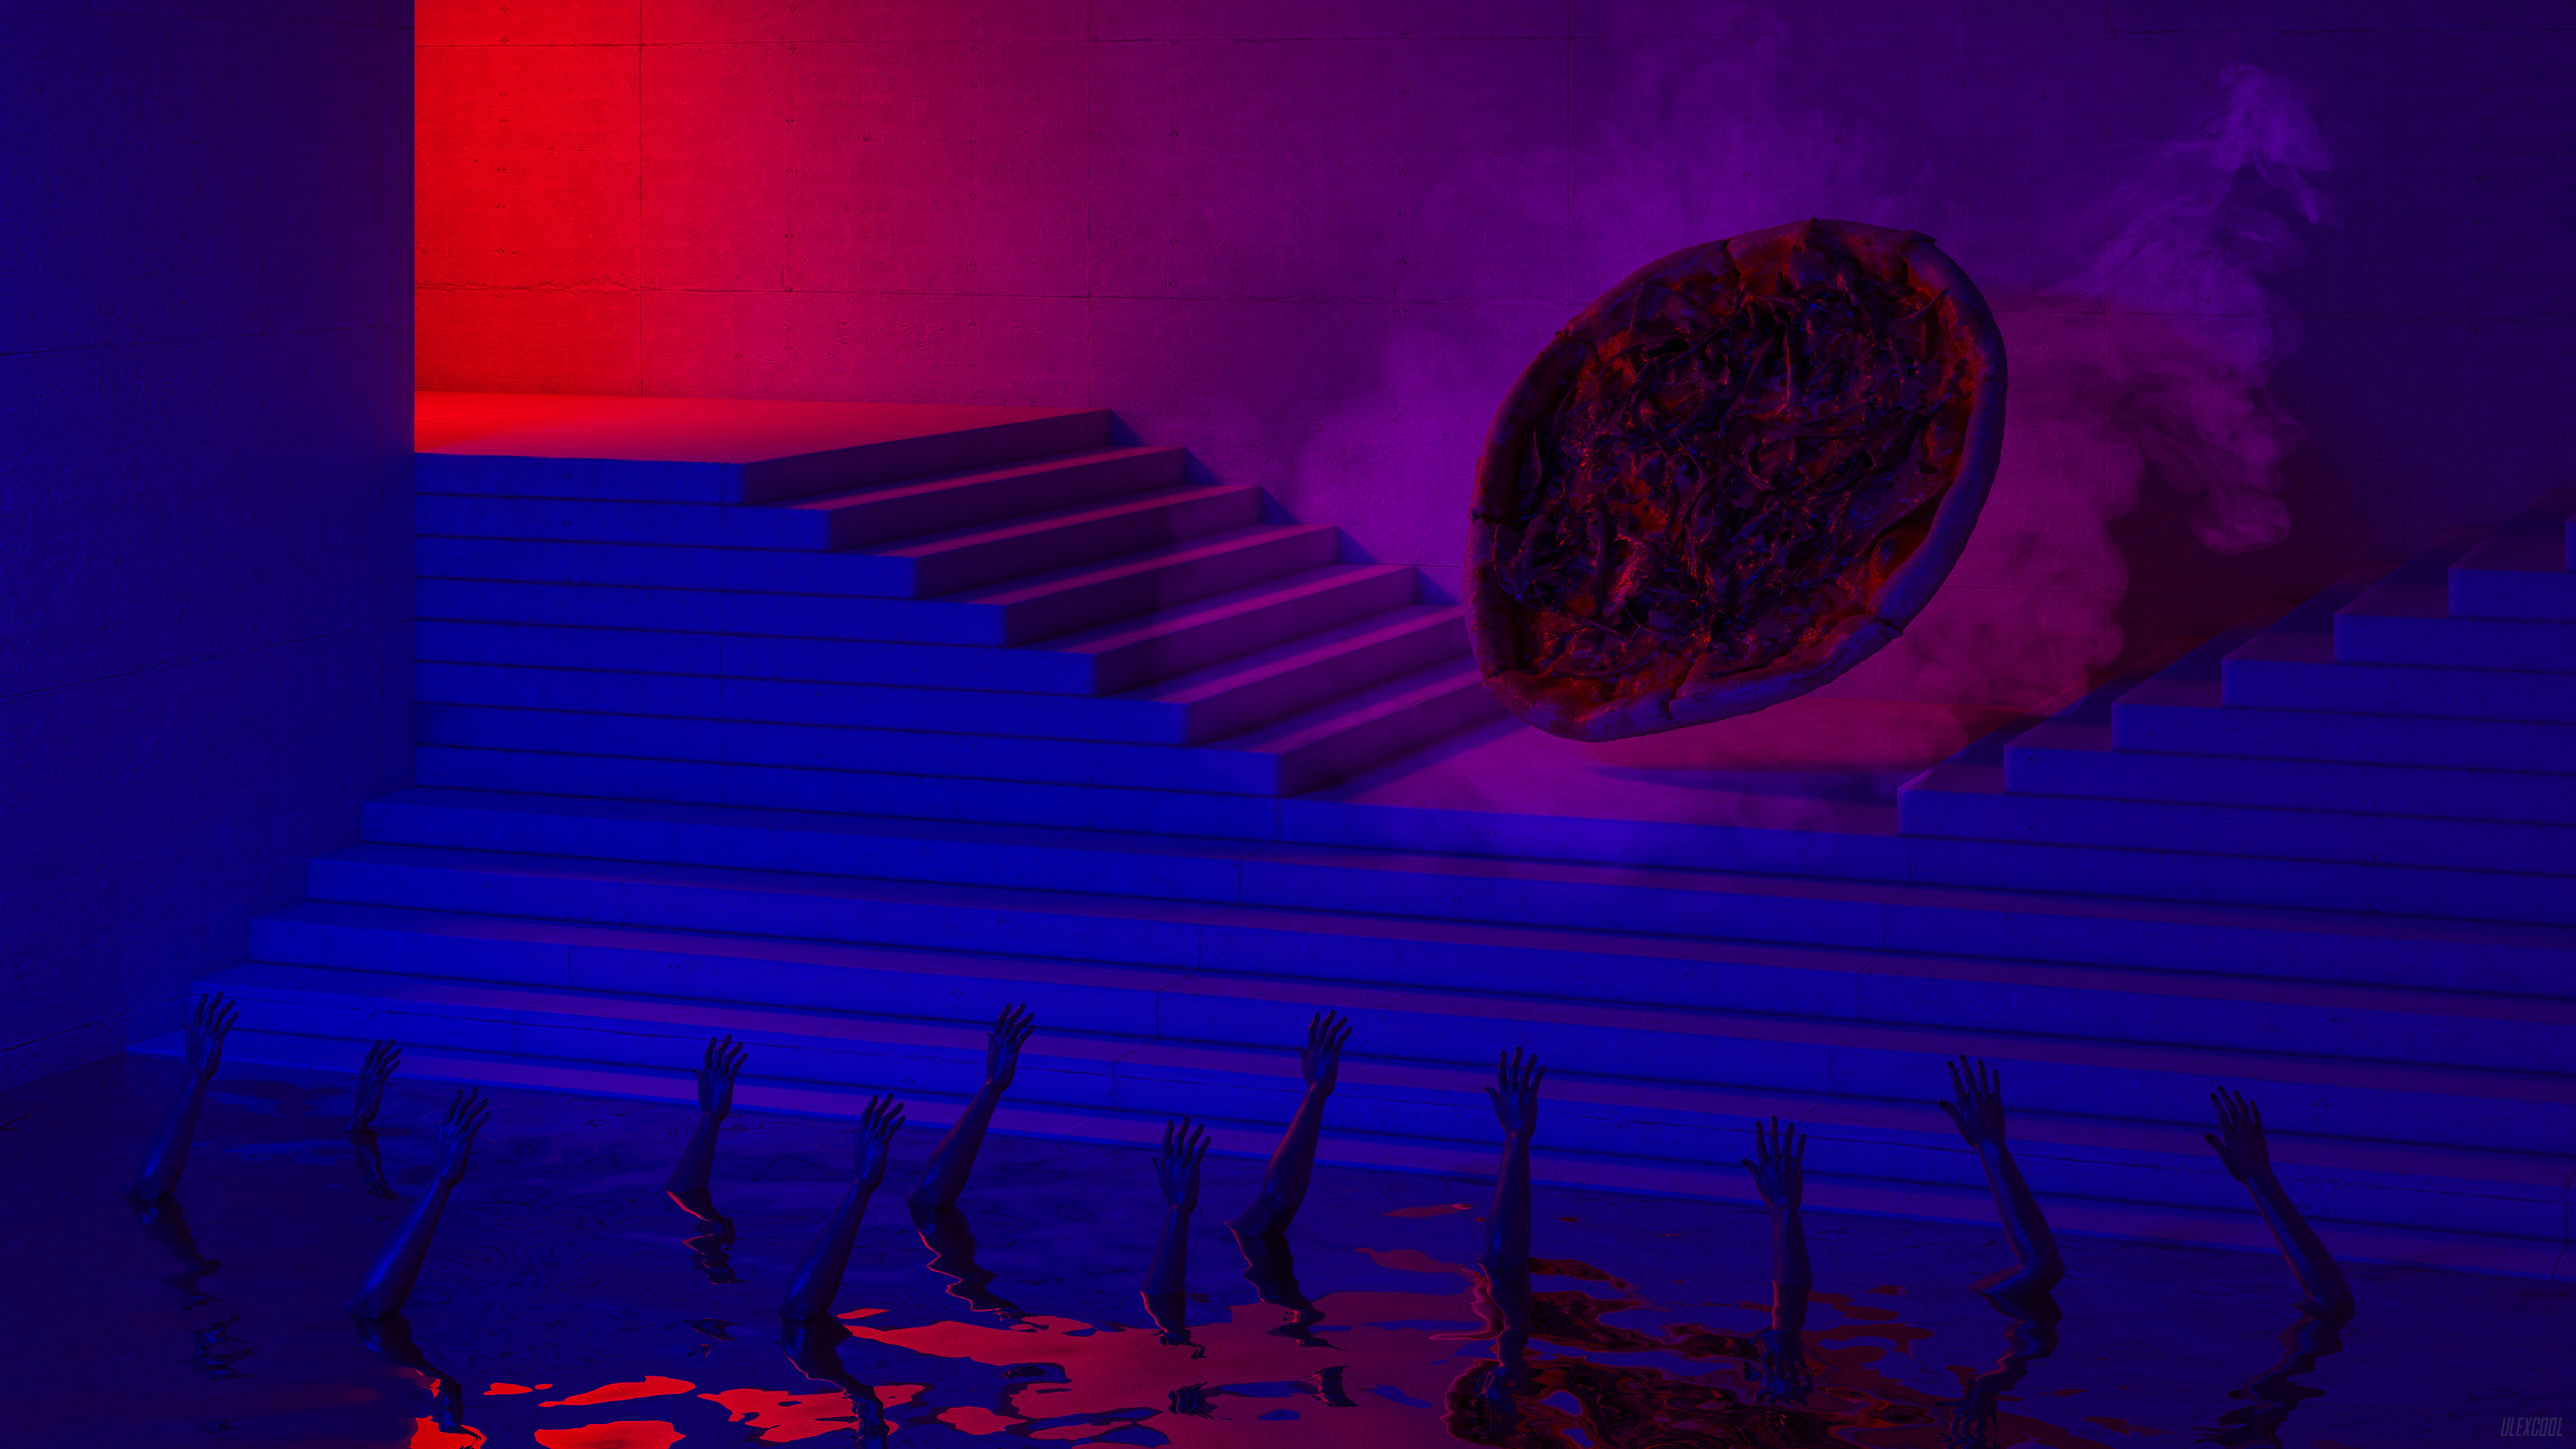 Neon Blue Red Water Hands Stairs Reflection Cult Cultist Pizza Digital Art Arms 3840x2160